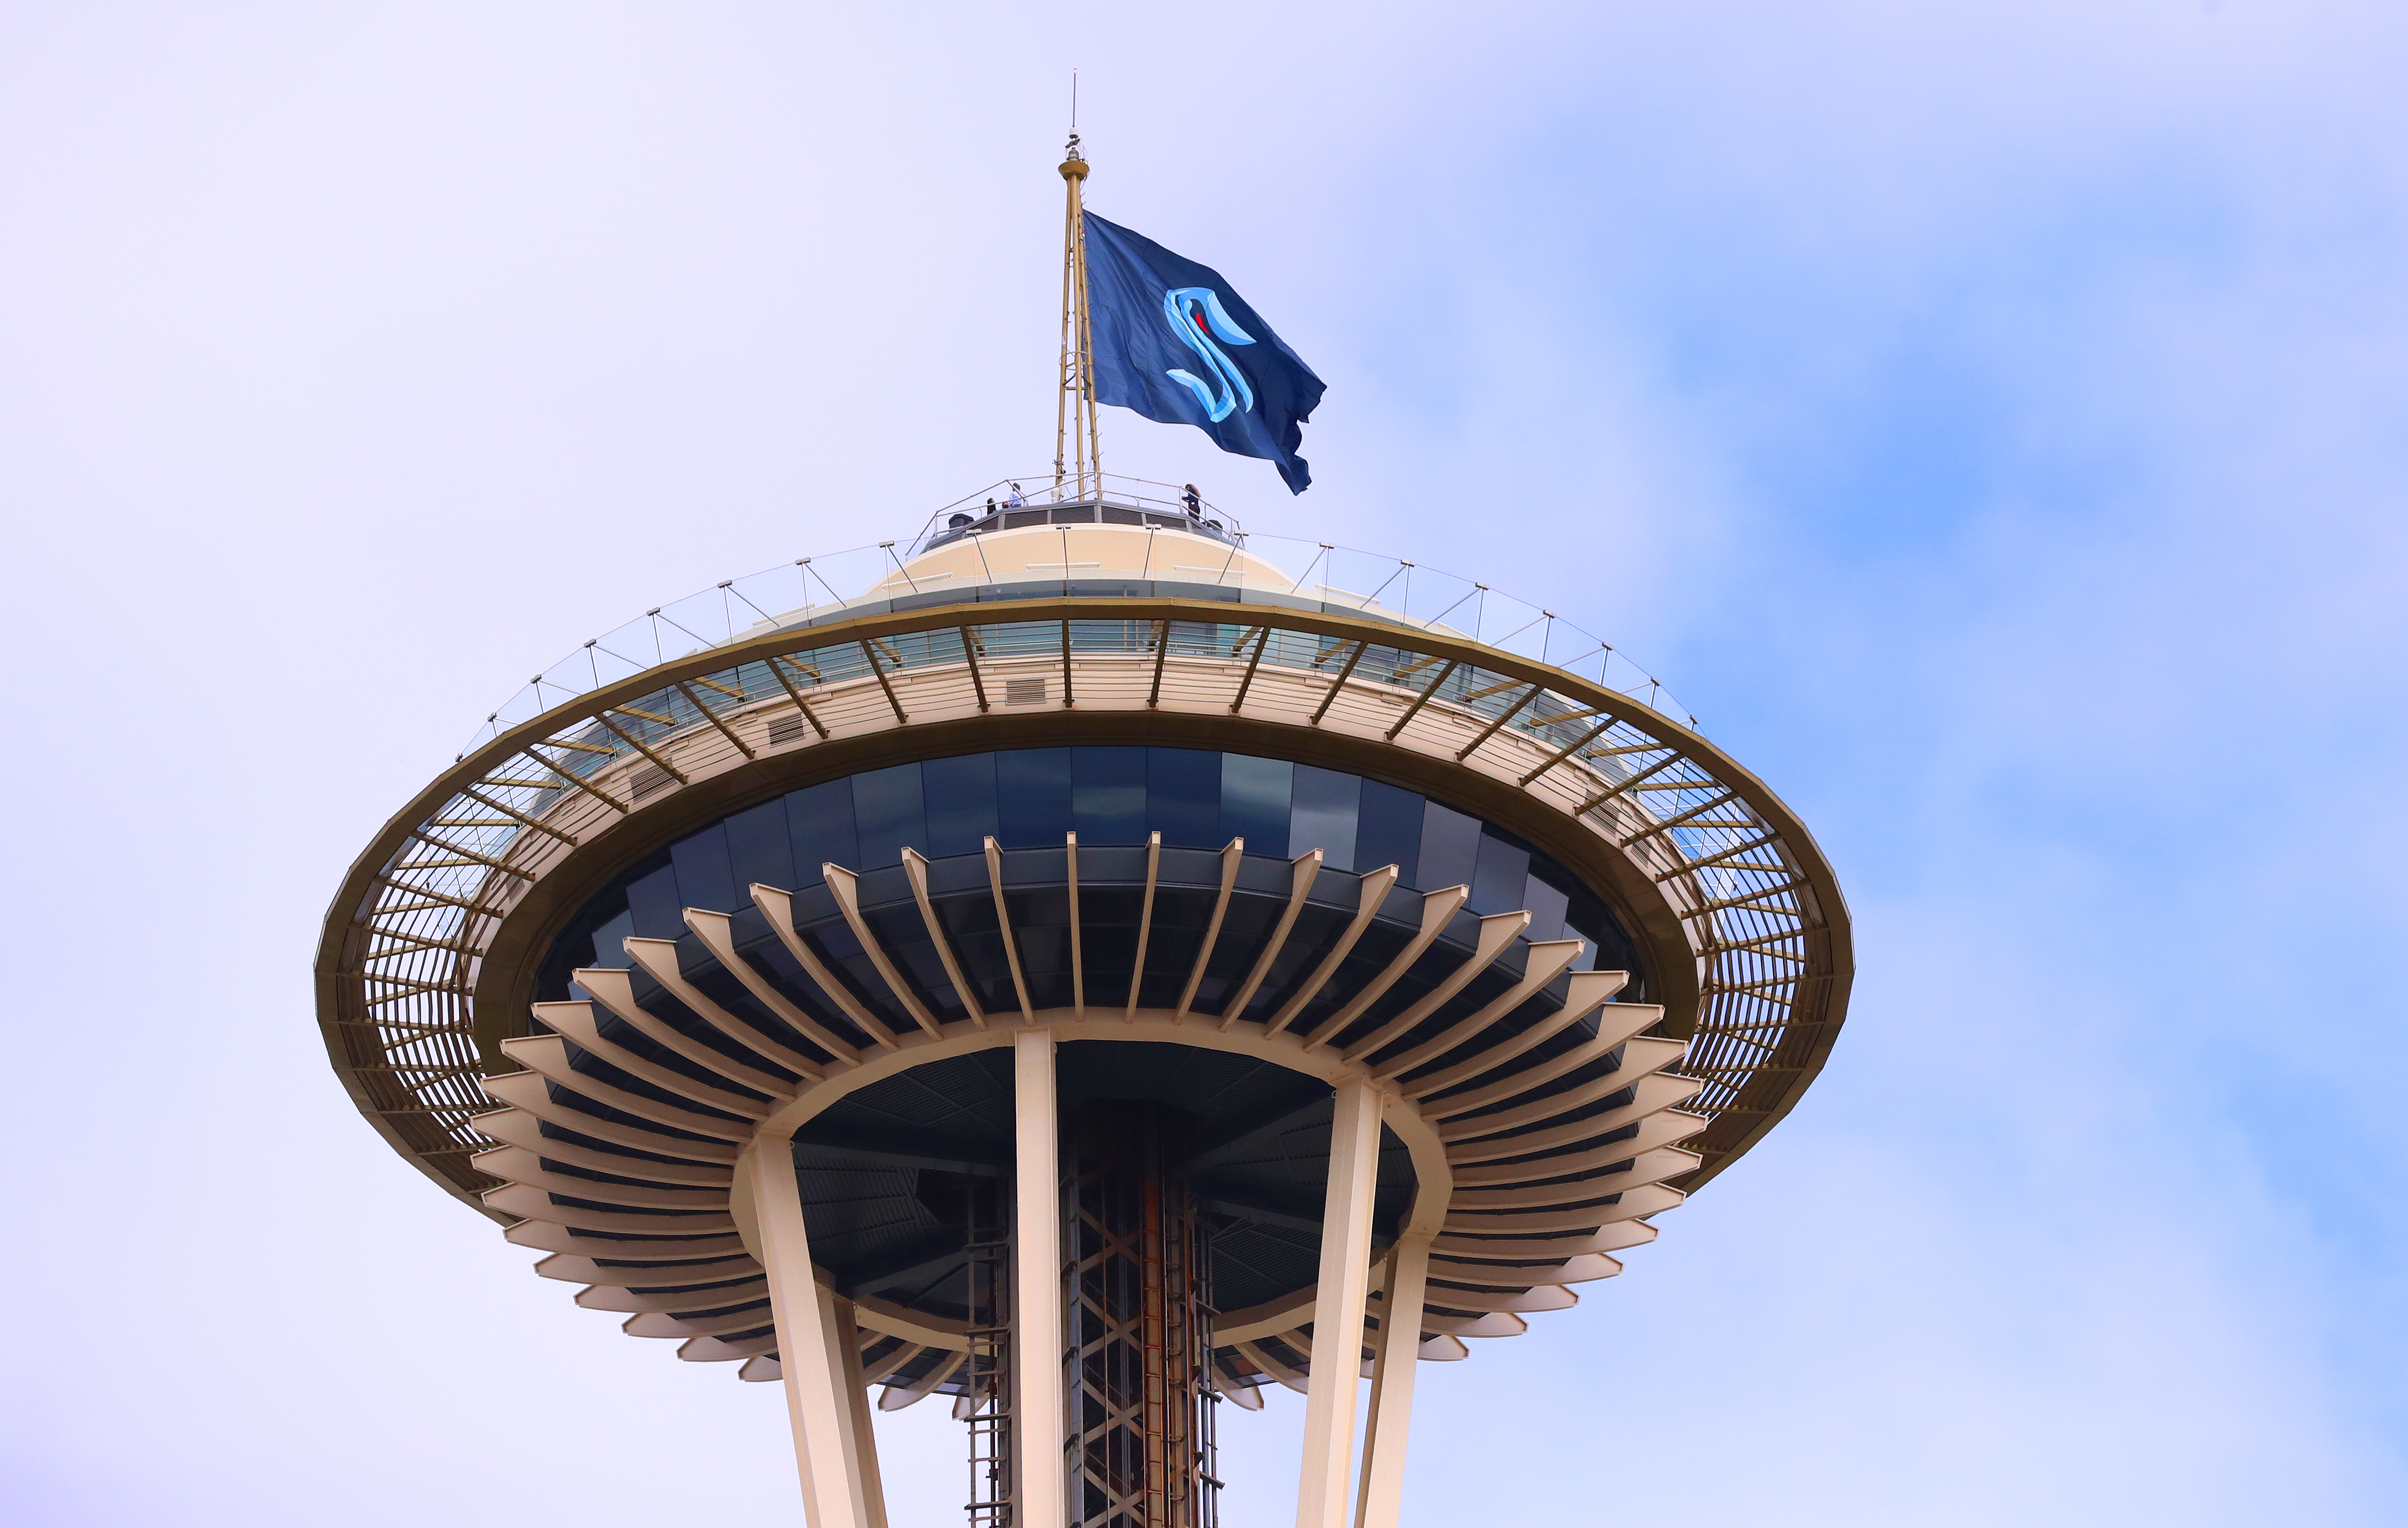 A general view of the Space Needle as the Seattle Kraken team flag is hung from above on July 23, 2020 in Seattle, Washington.